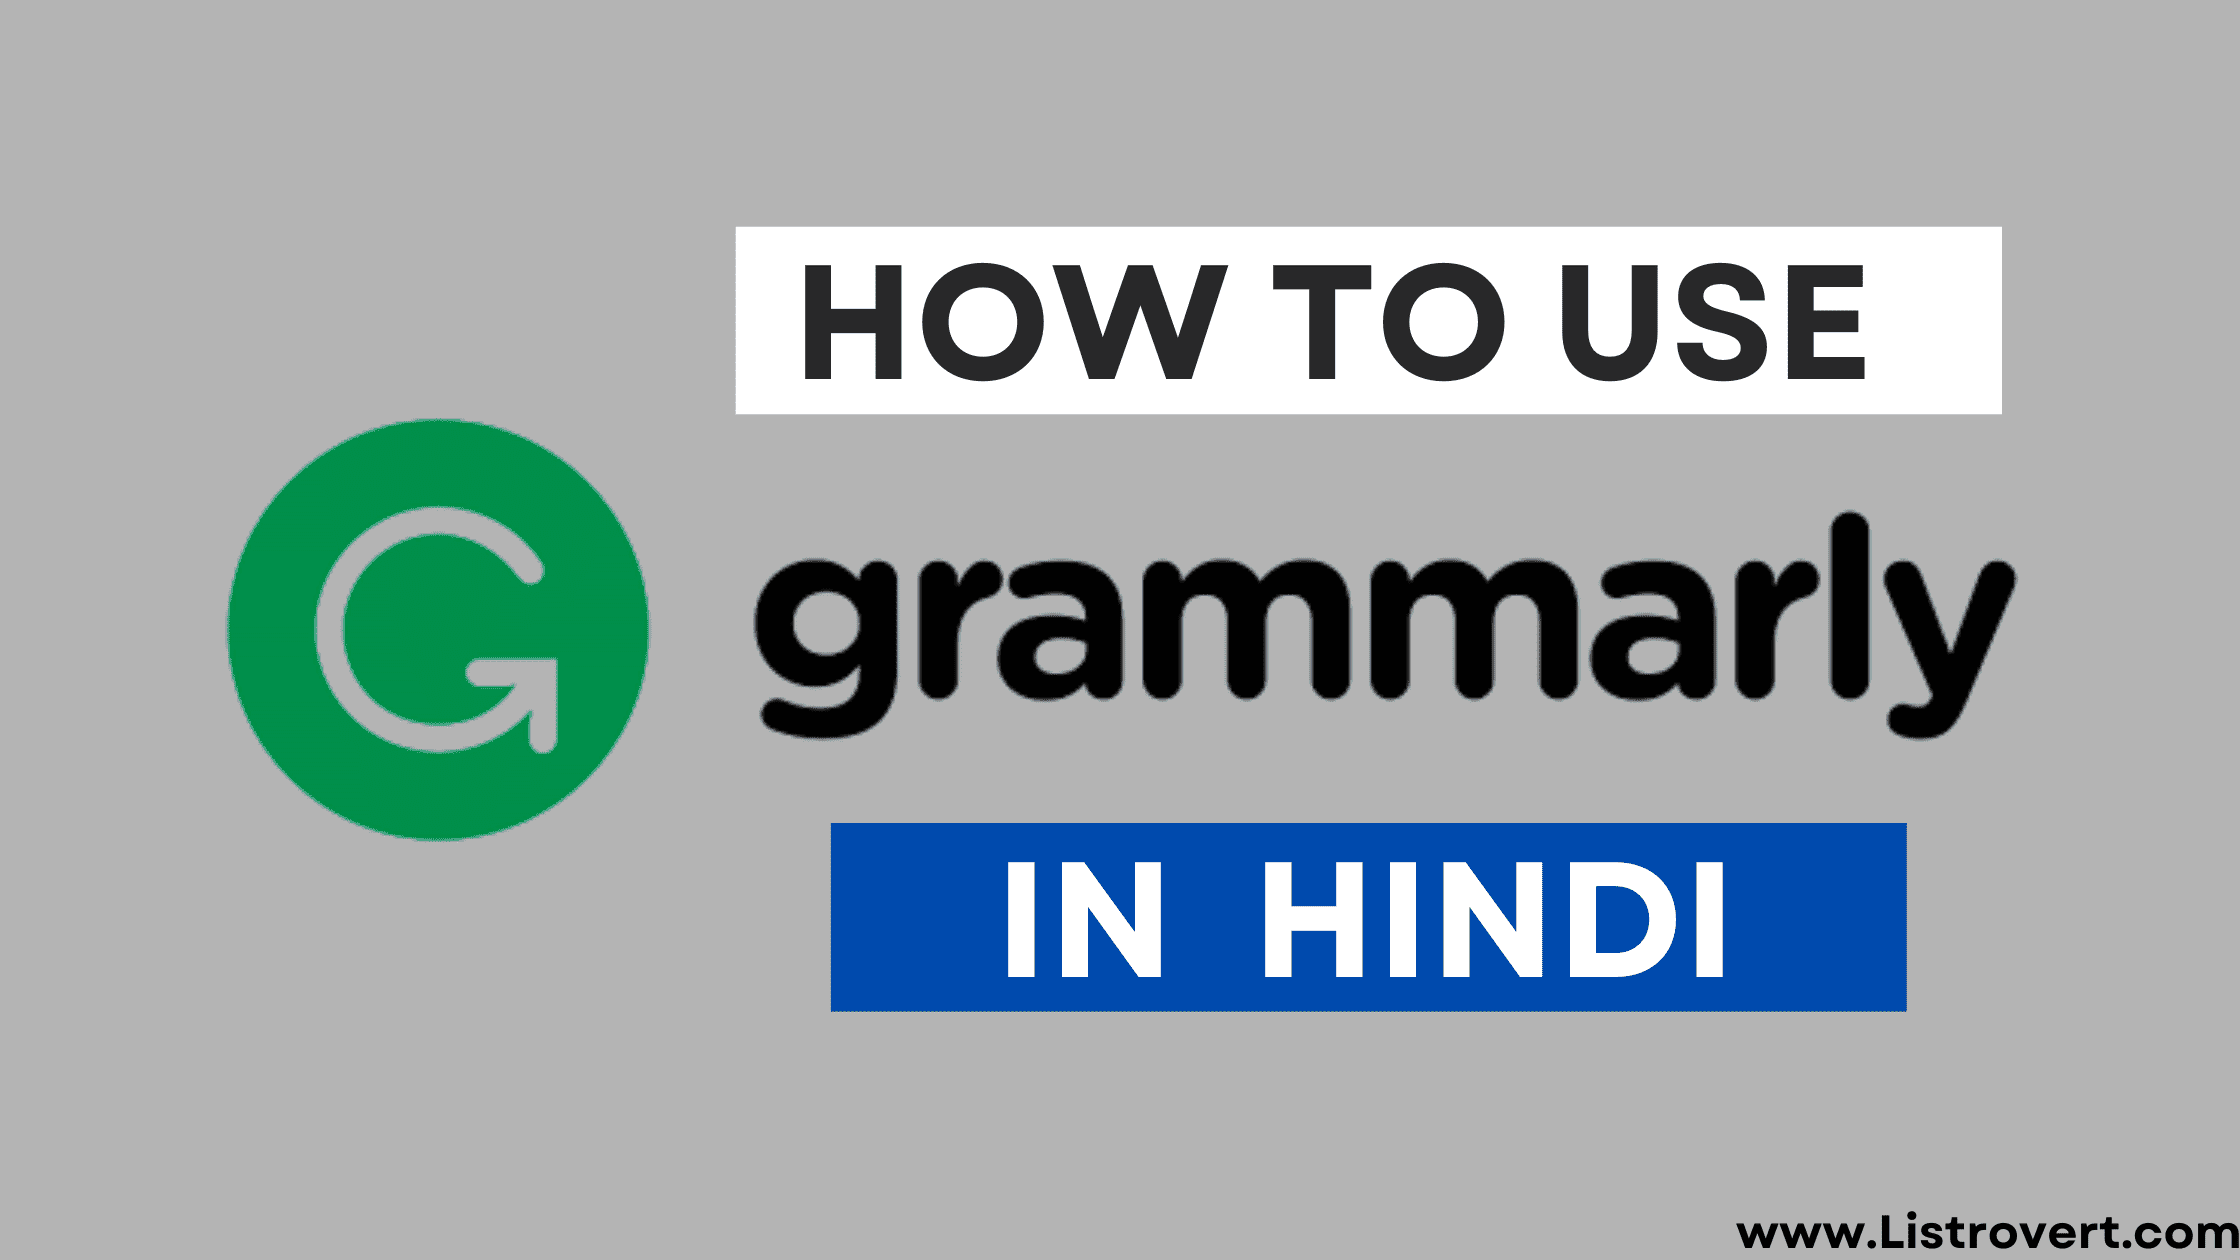 How to use Grammarly in Hindi